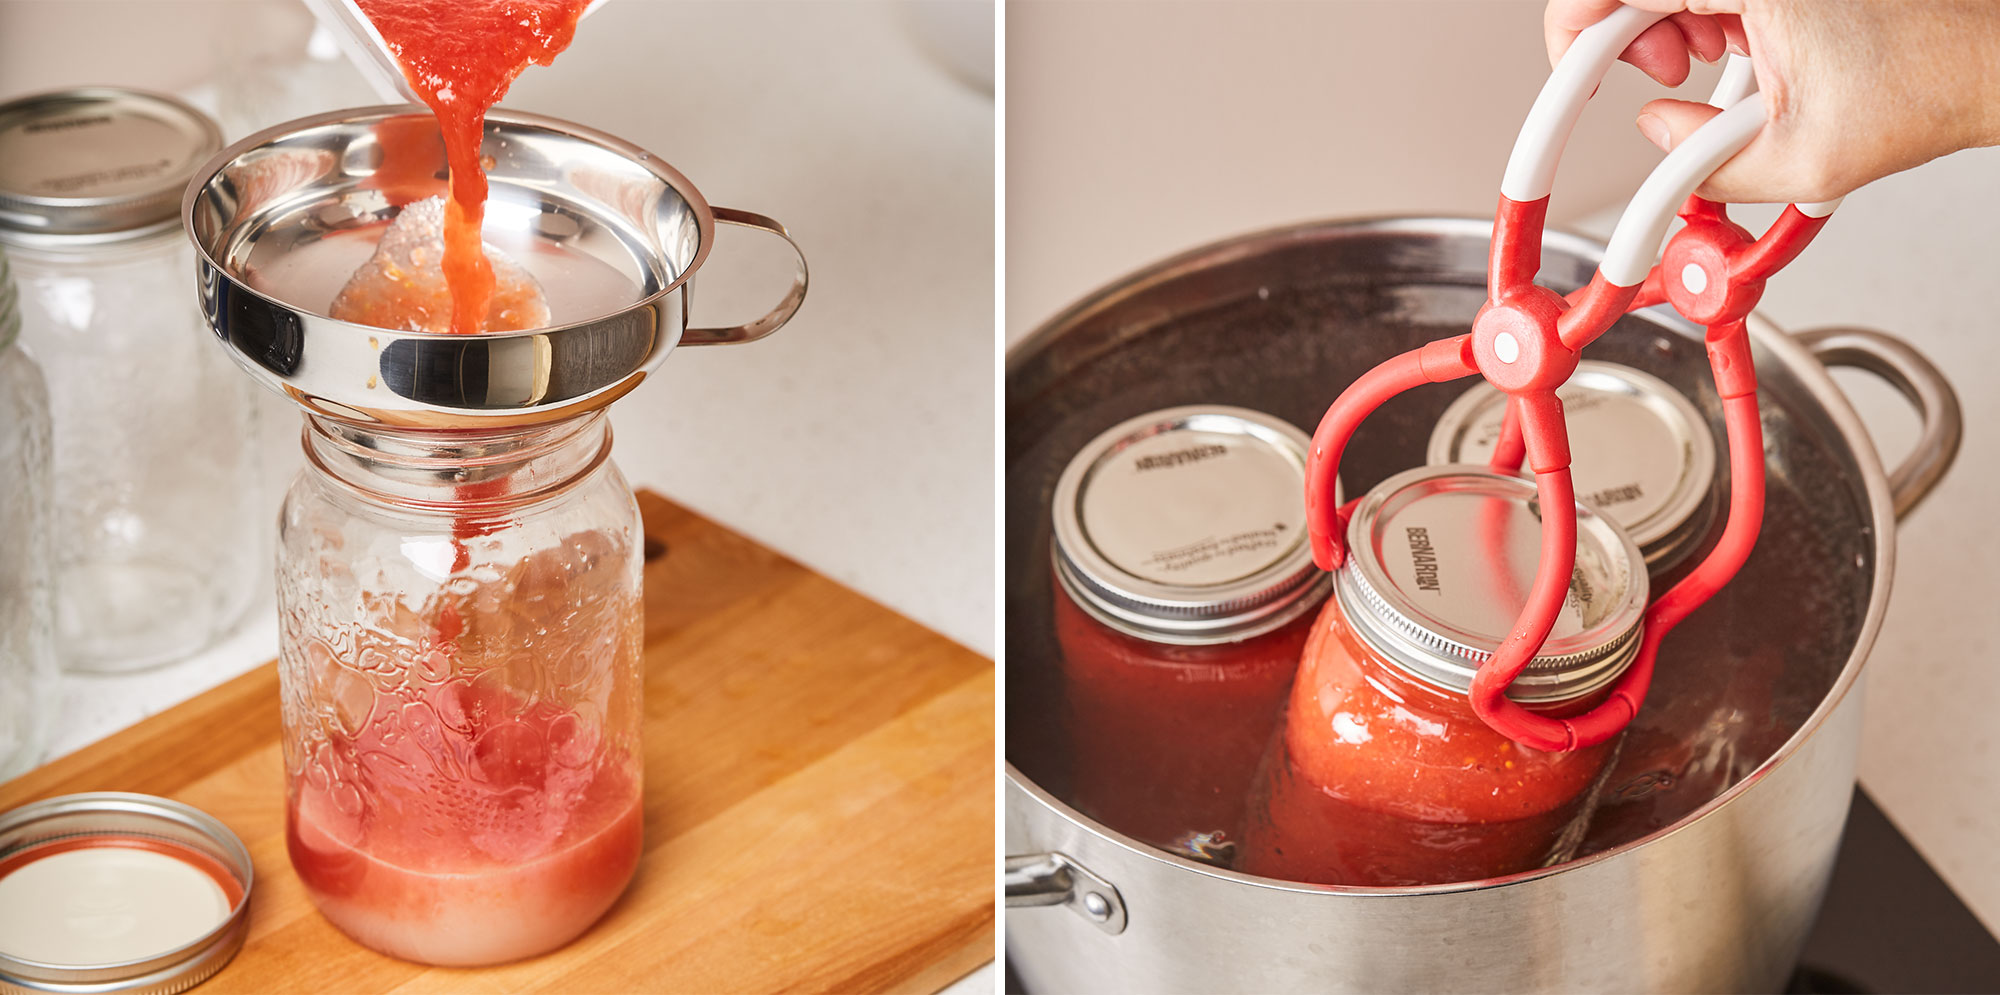 Image left: Using a funnel to pour tomato paste into a jar with lemon juice. Image right: Using a lifter to remove hot jars from a pot of water.